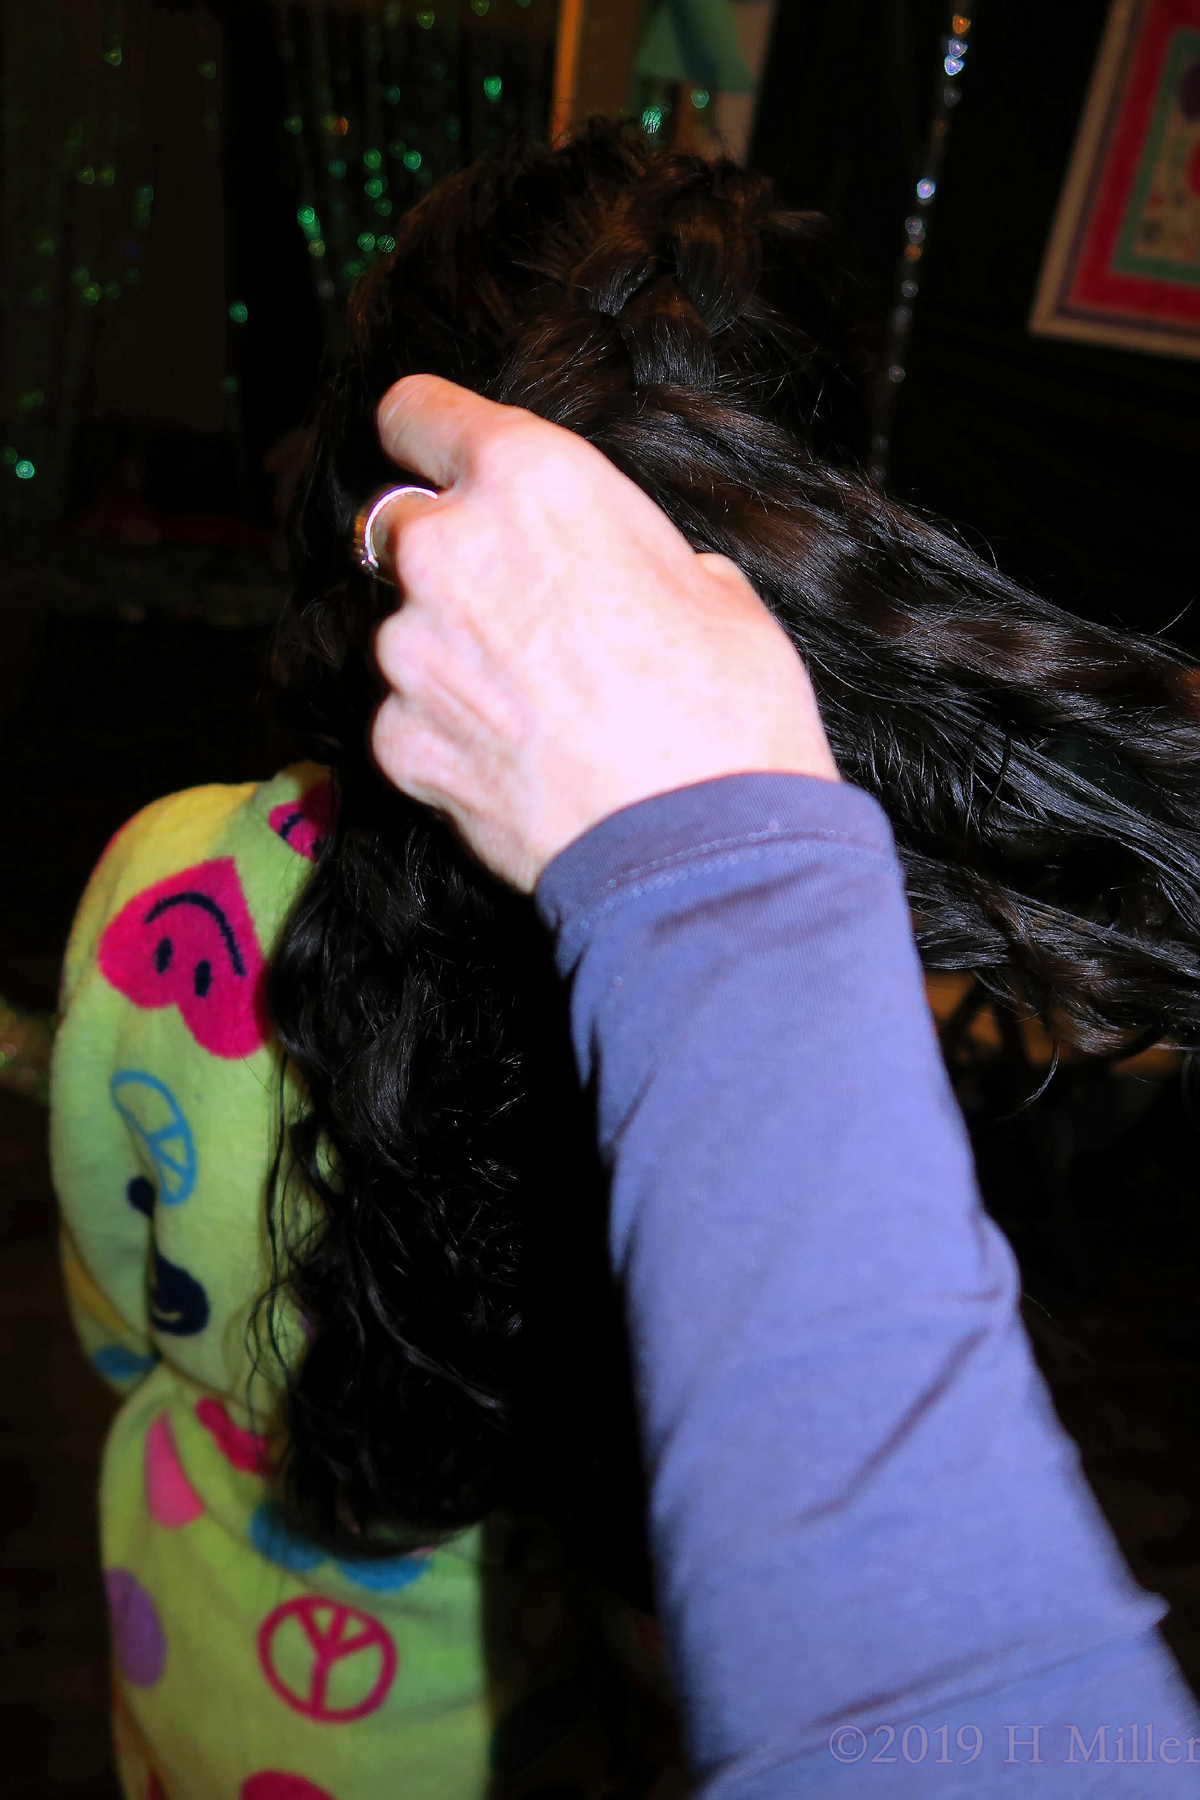 Back Of The Action! Kids Hairstyle At The Spa Party On A Birthday Guest! 